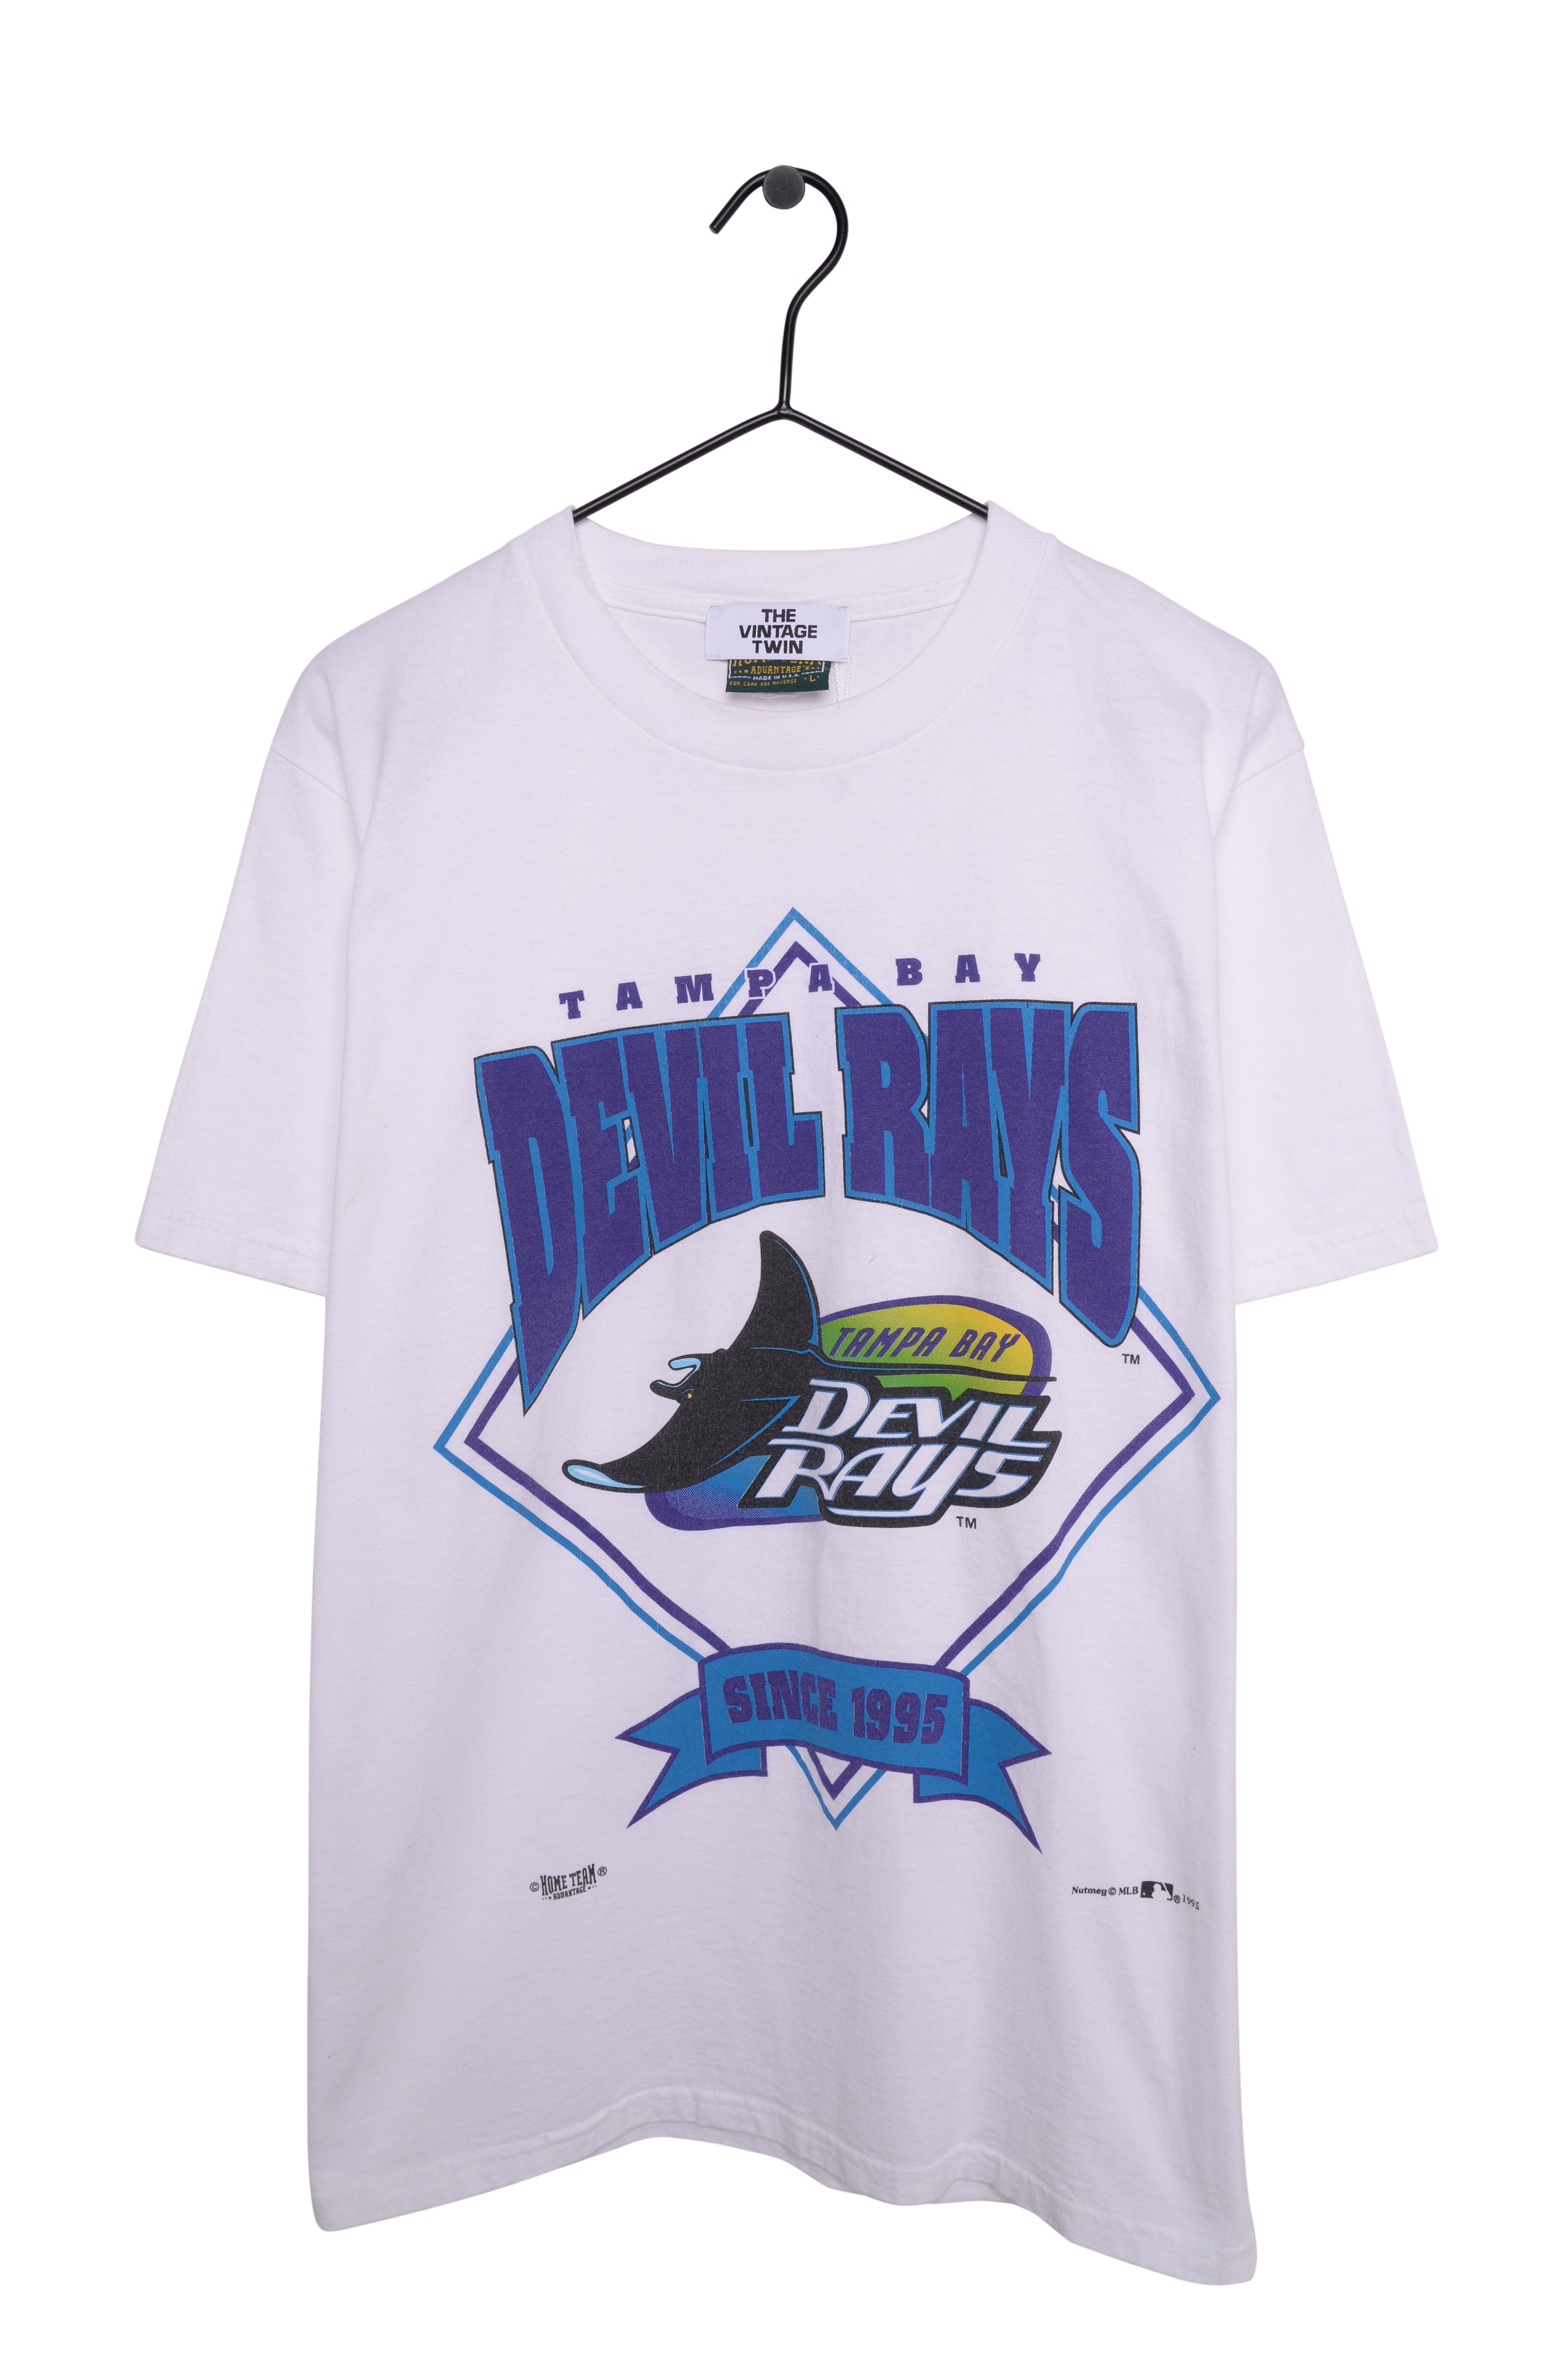 1995 Tampa Bay Devil Rays Tee USA Free Shipping - The Vintage Twin